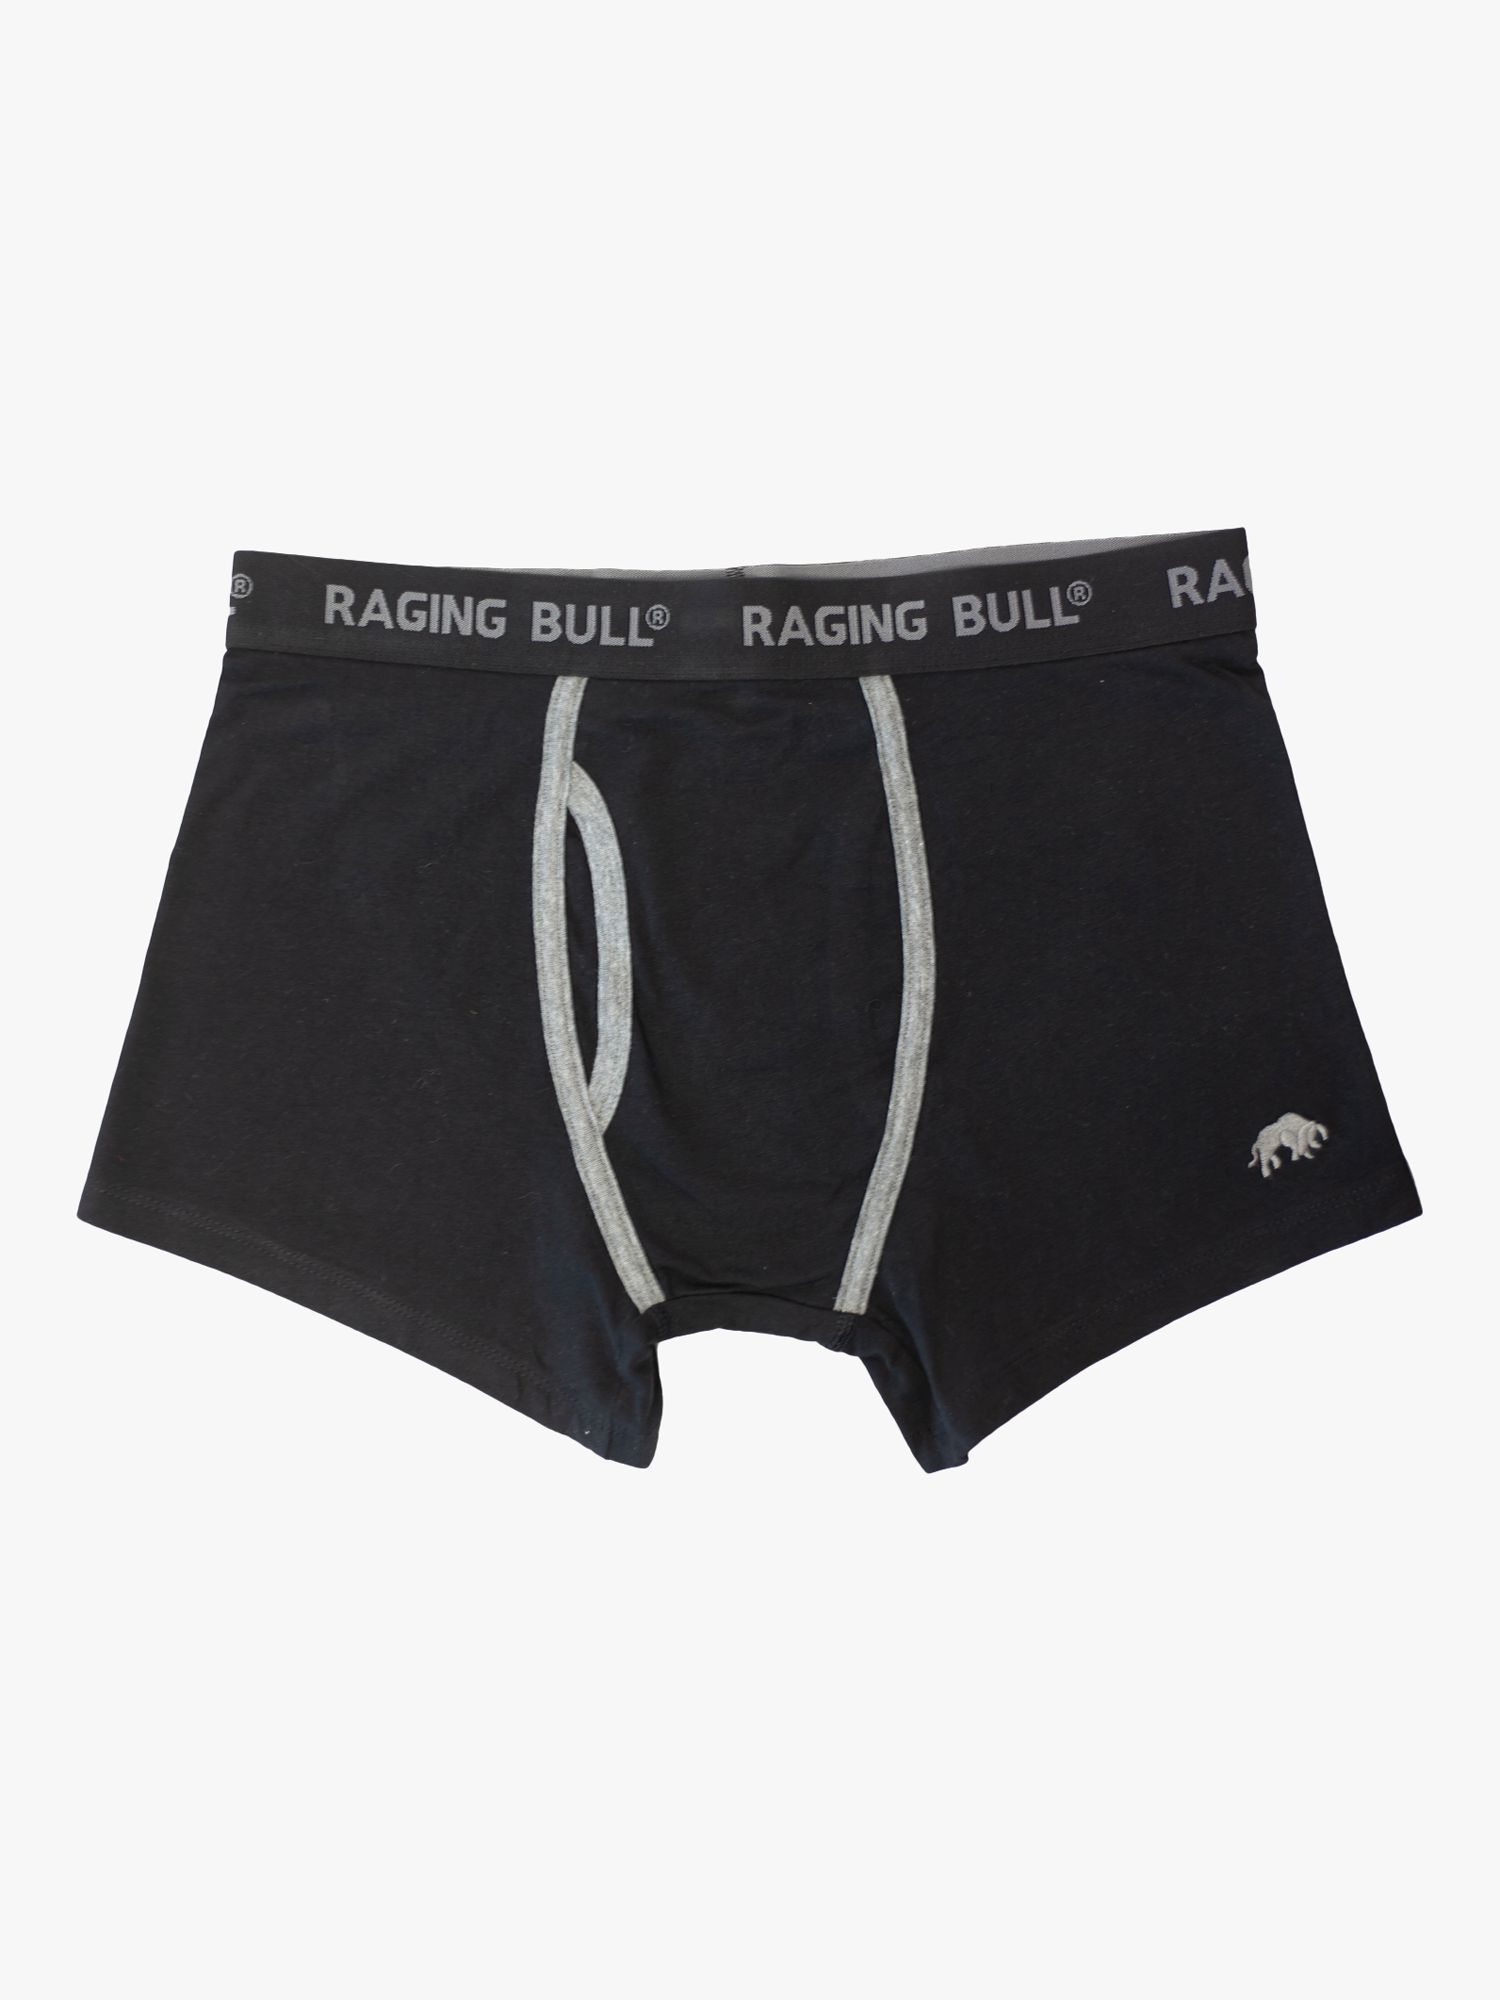 Raging Bull Cotton Stretch Boxers, Pack of 3, Black, S